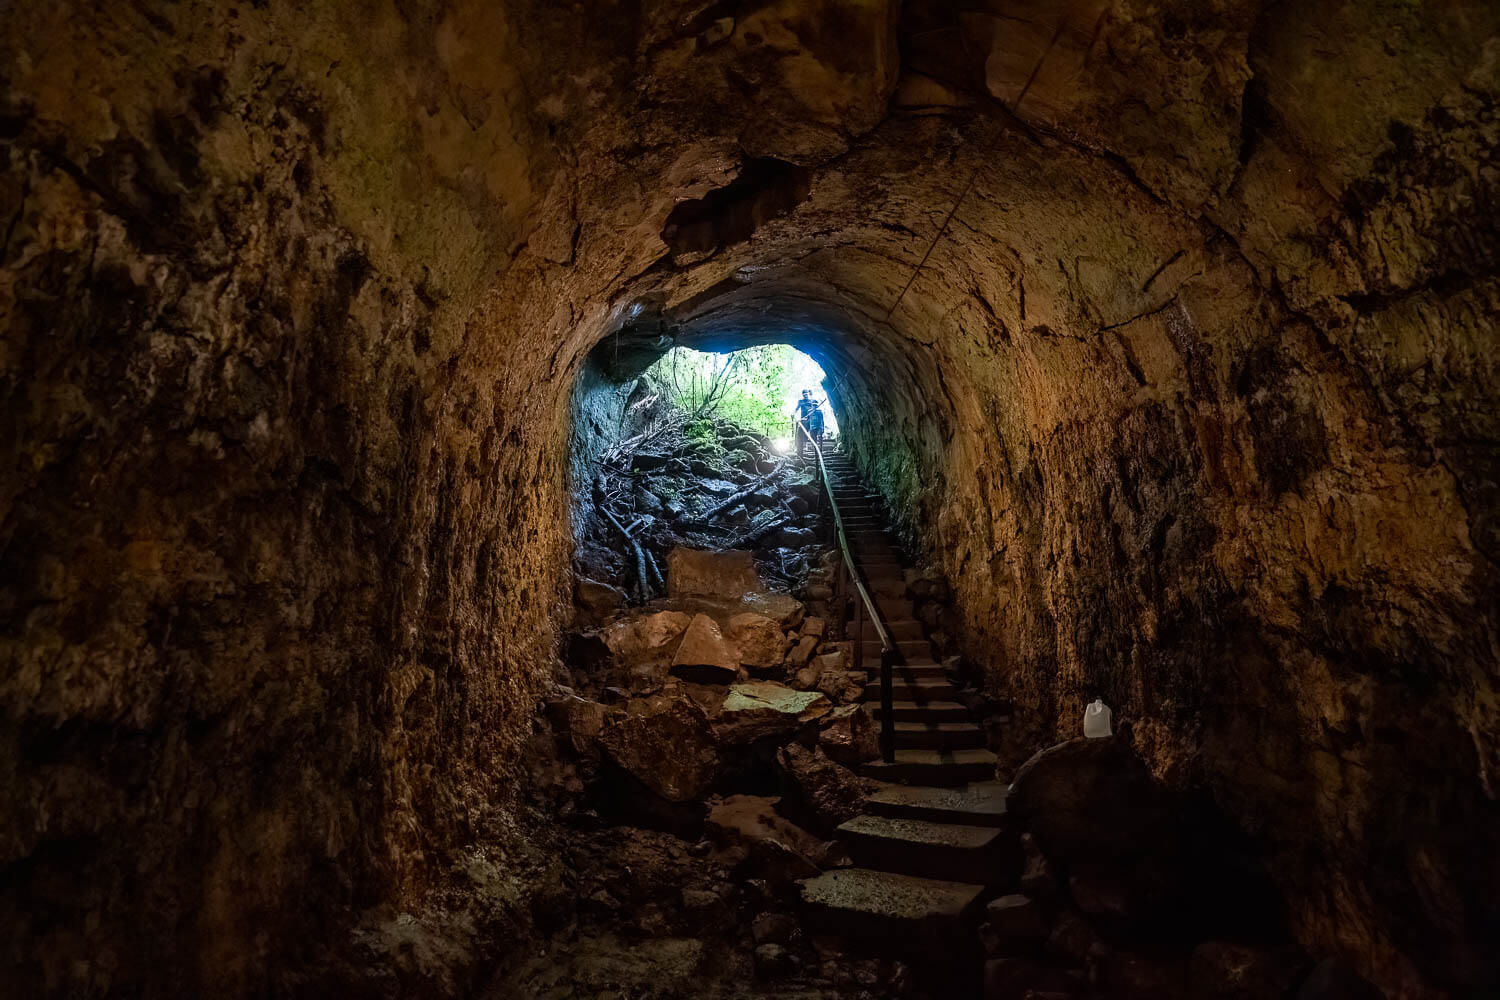 The exit of the lava tunnels in Santa Cruz